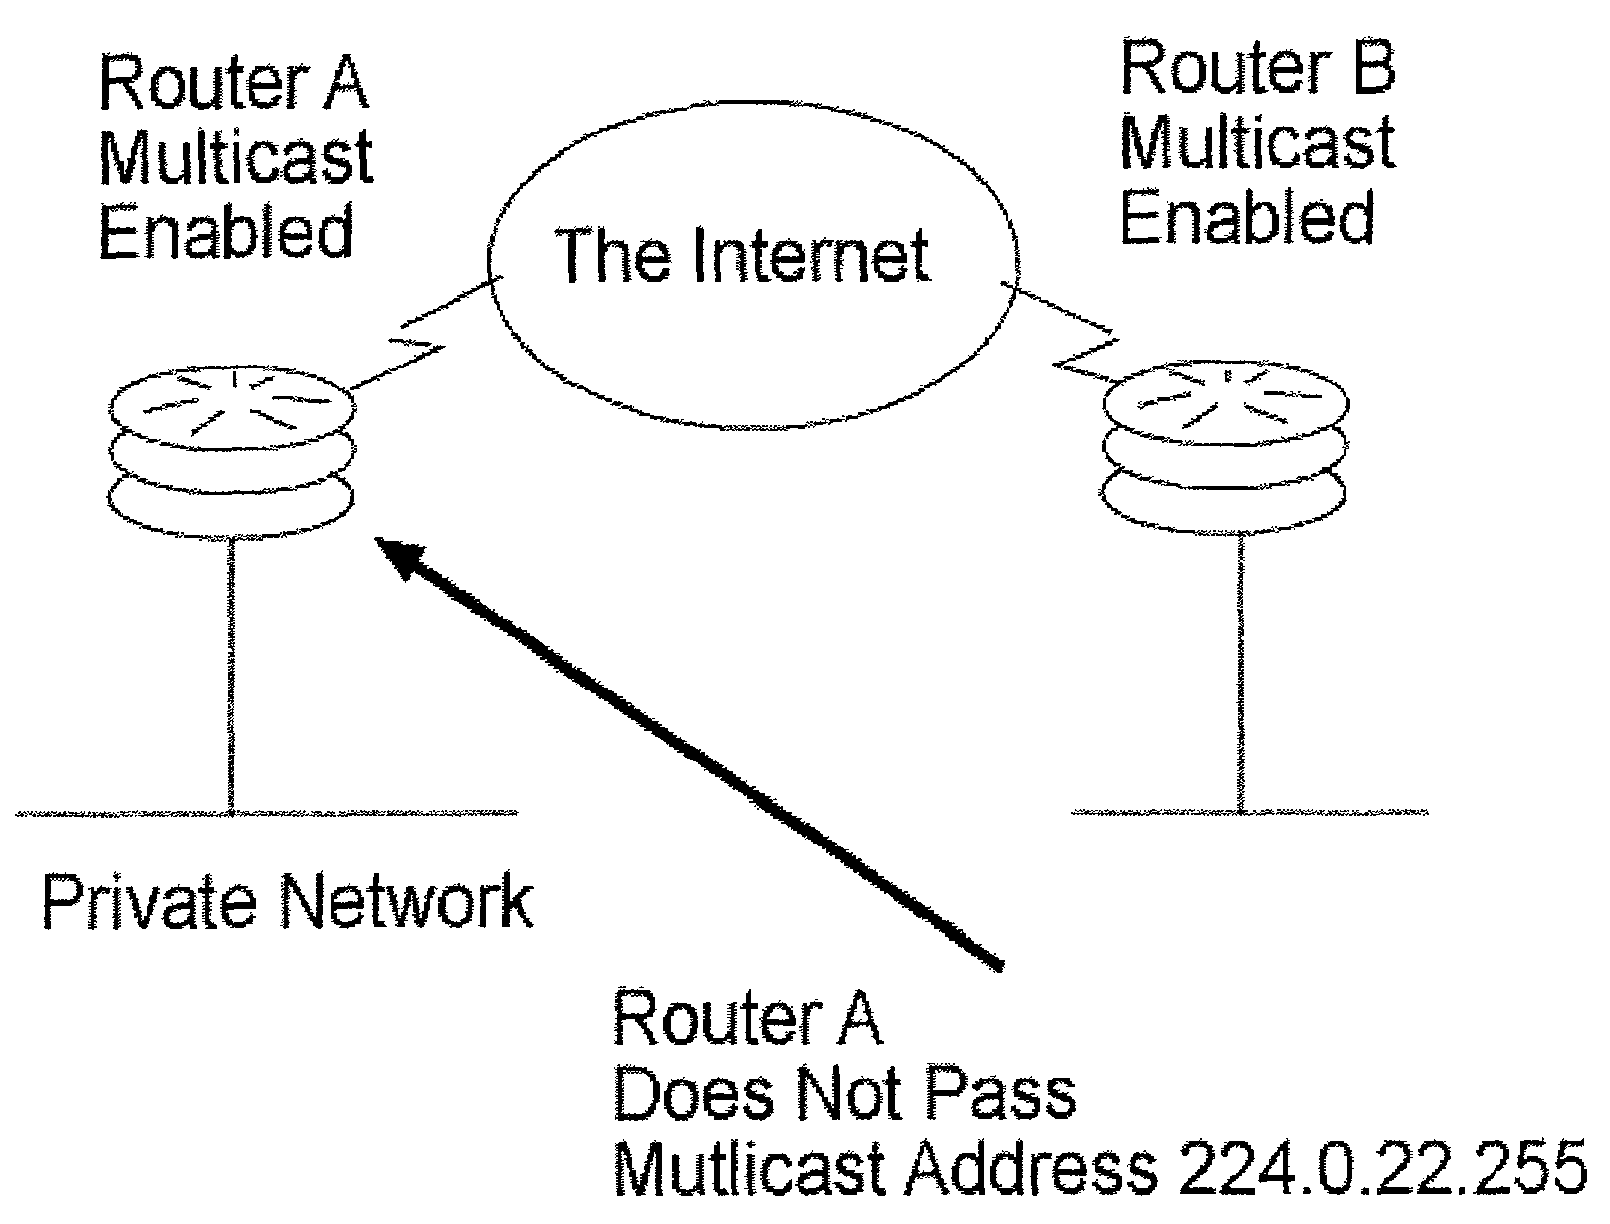 Method for secure multicast repeating on the public Internet